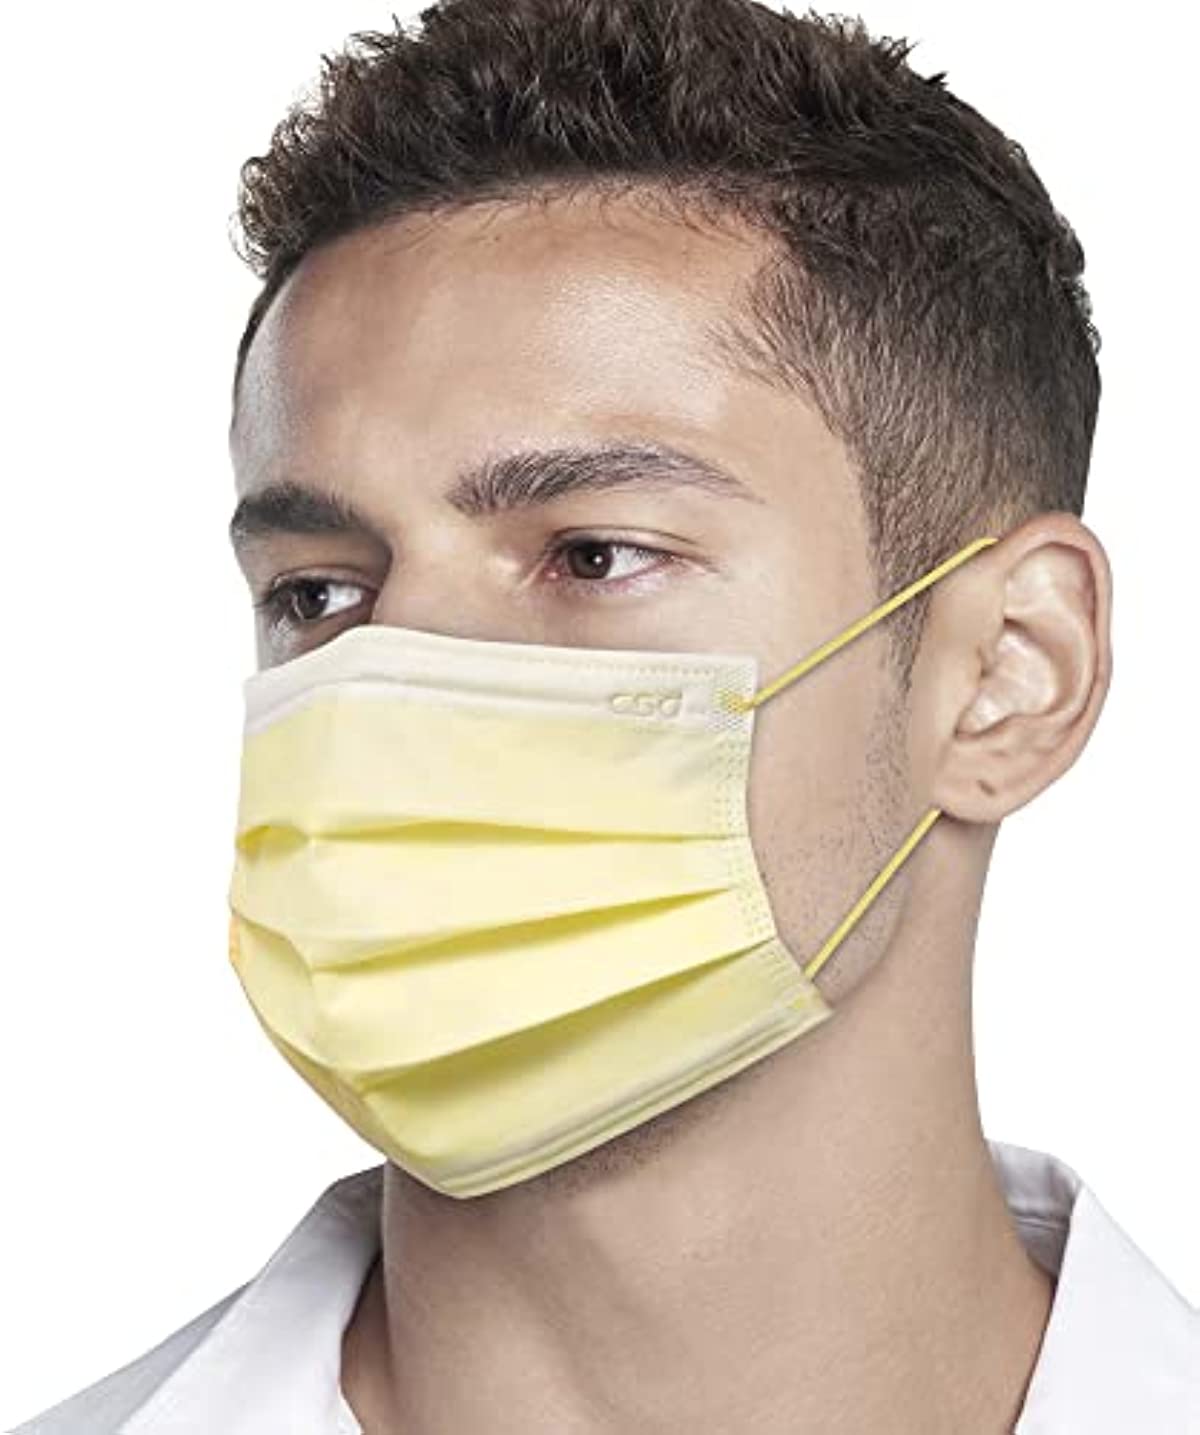 CSD Colo Mood Disposable Face Mask, 3 Ply Filter Protection with Colored Elastic Earloop, Breathable and Fashionable for Adult, Calla Yellow 30 Pcs/Box